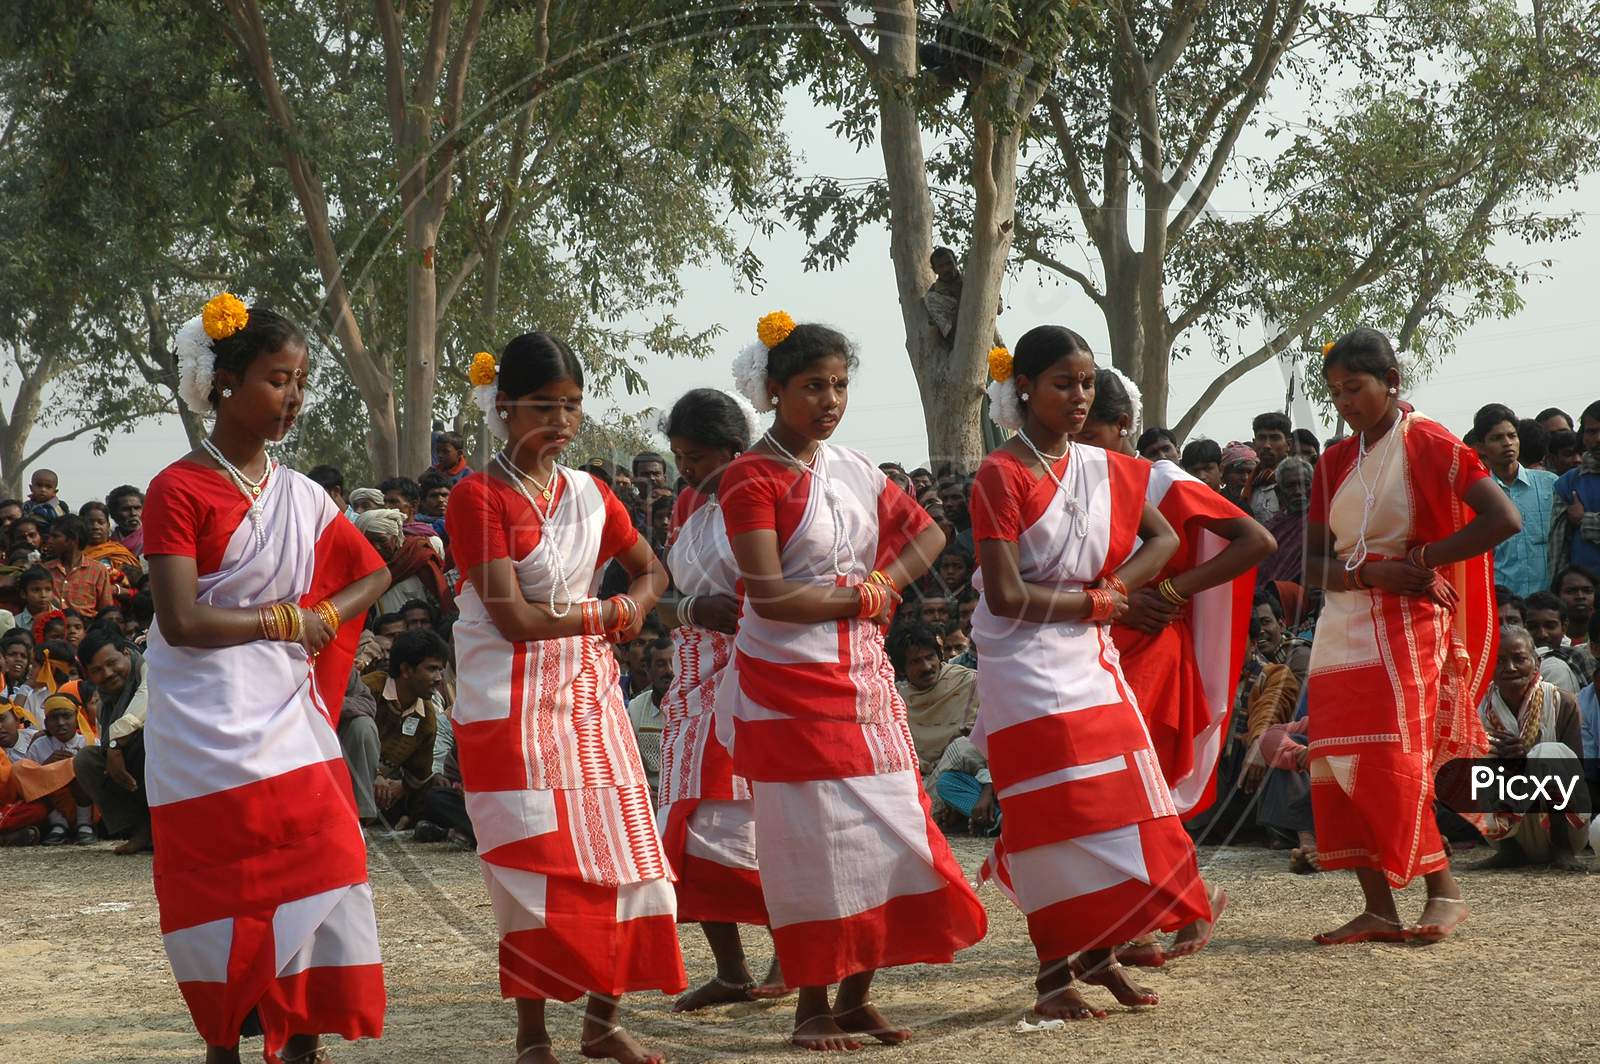 Indian Tribal People Performing Traditional Folk Dance During Festivals in Murshidabad, West Bengal